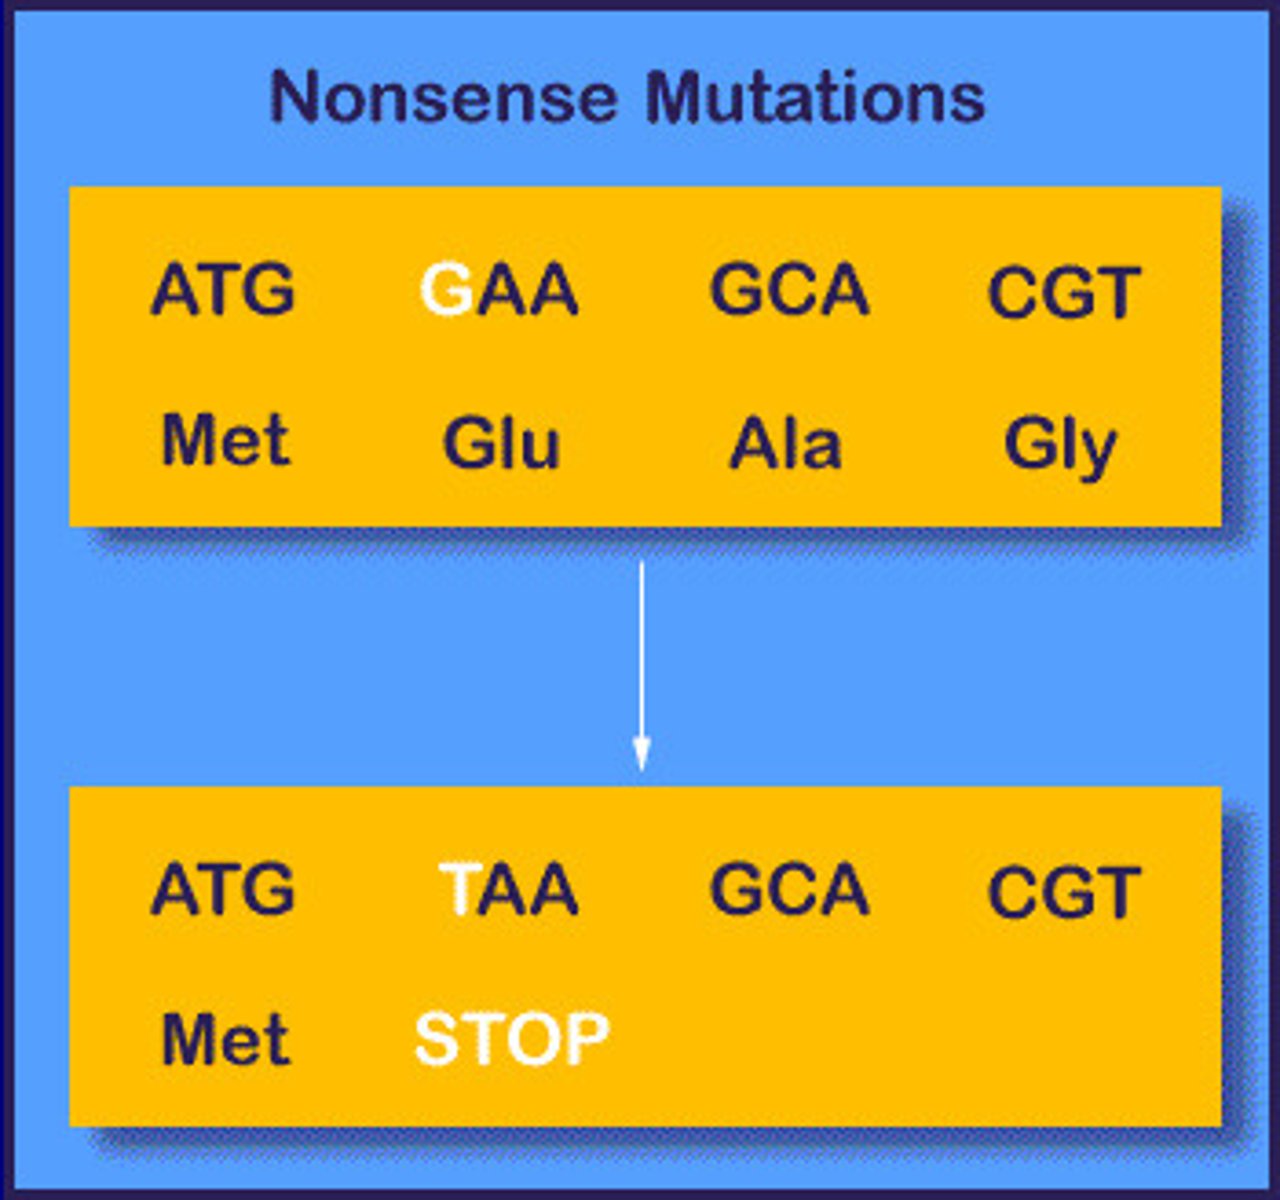 <p>A mutation that changes an amino acid codon to one of the three stop codons, resulting in a shorter and usually nonfunctional protein.</p>